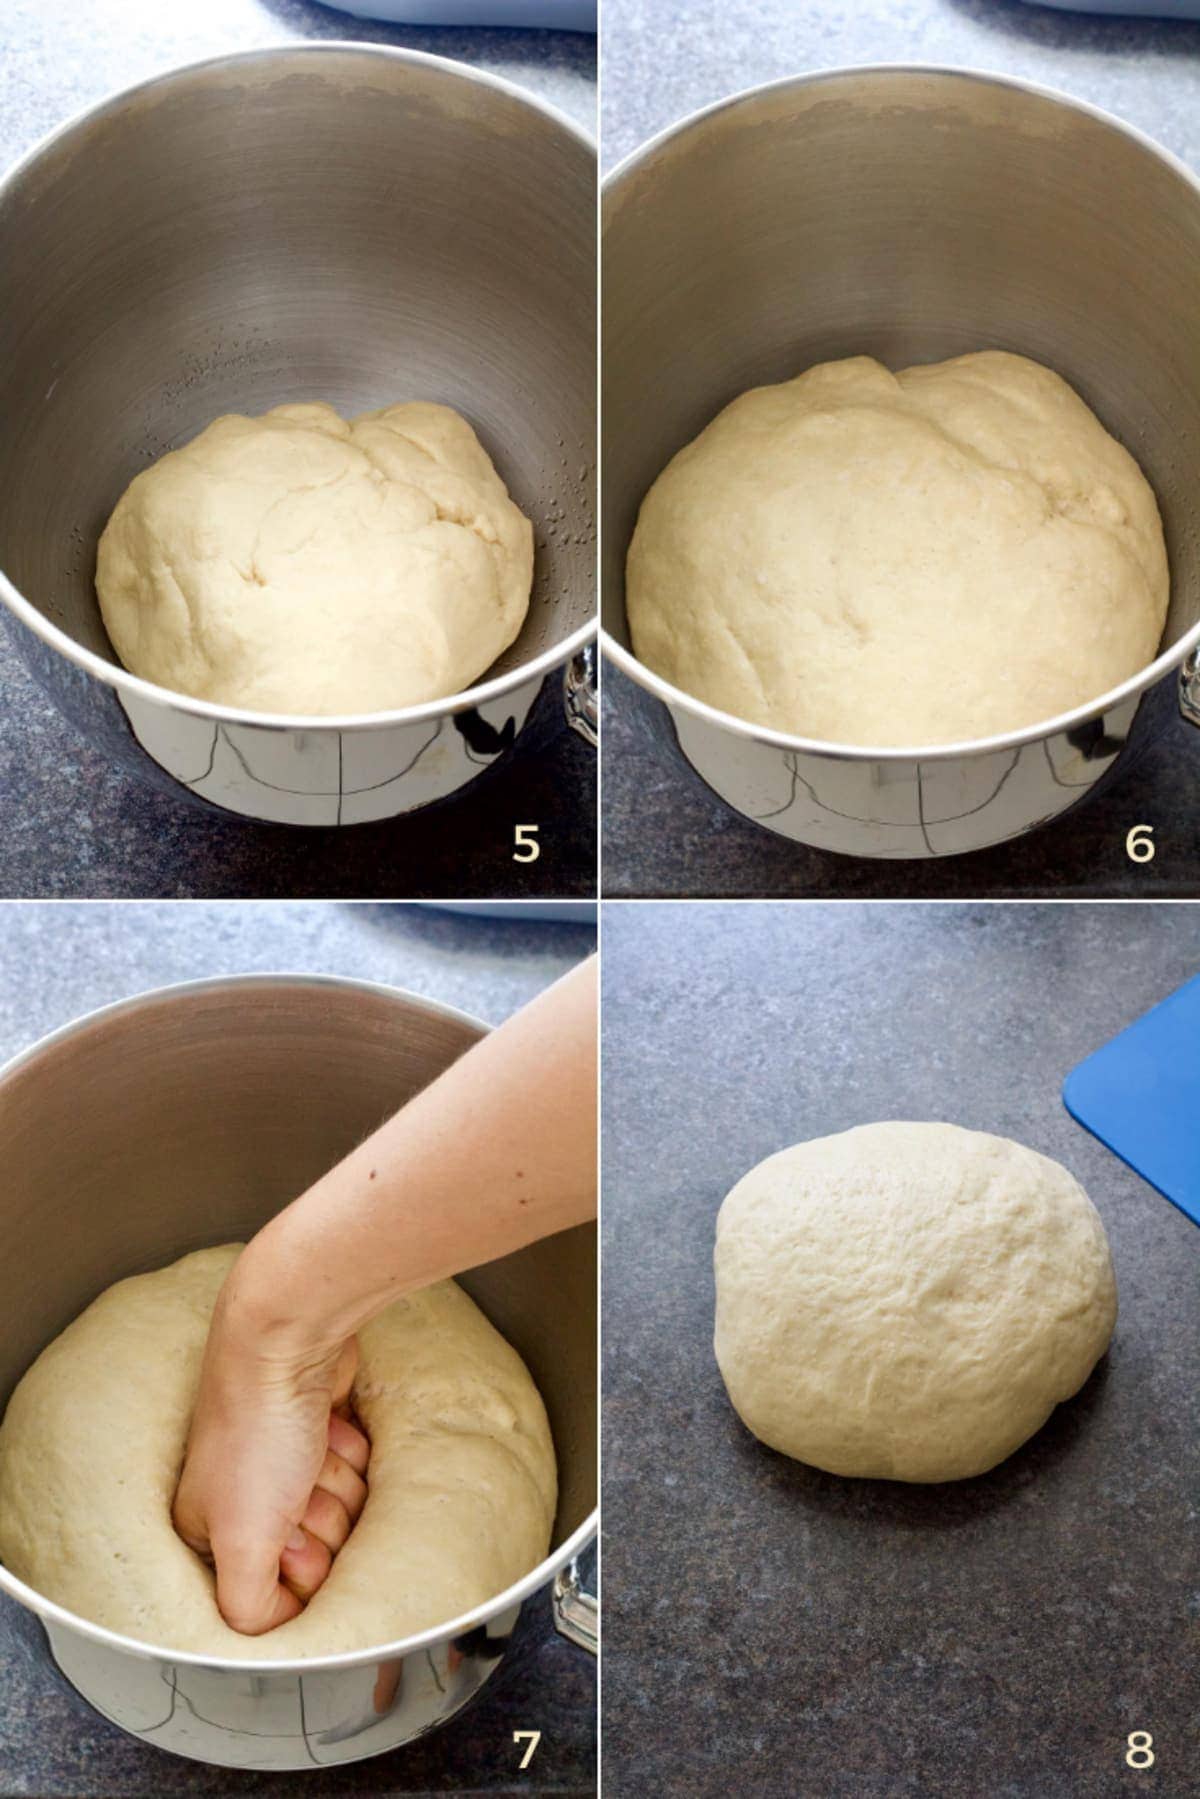 Dough rising in a bowl and hand deflating it.